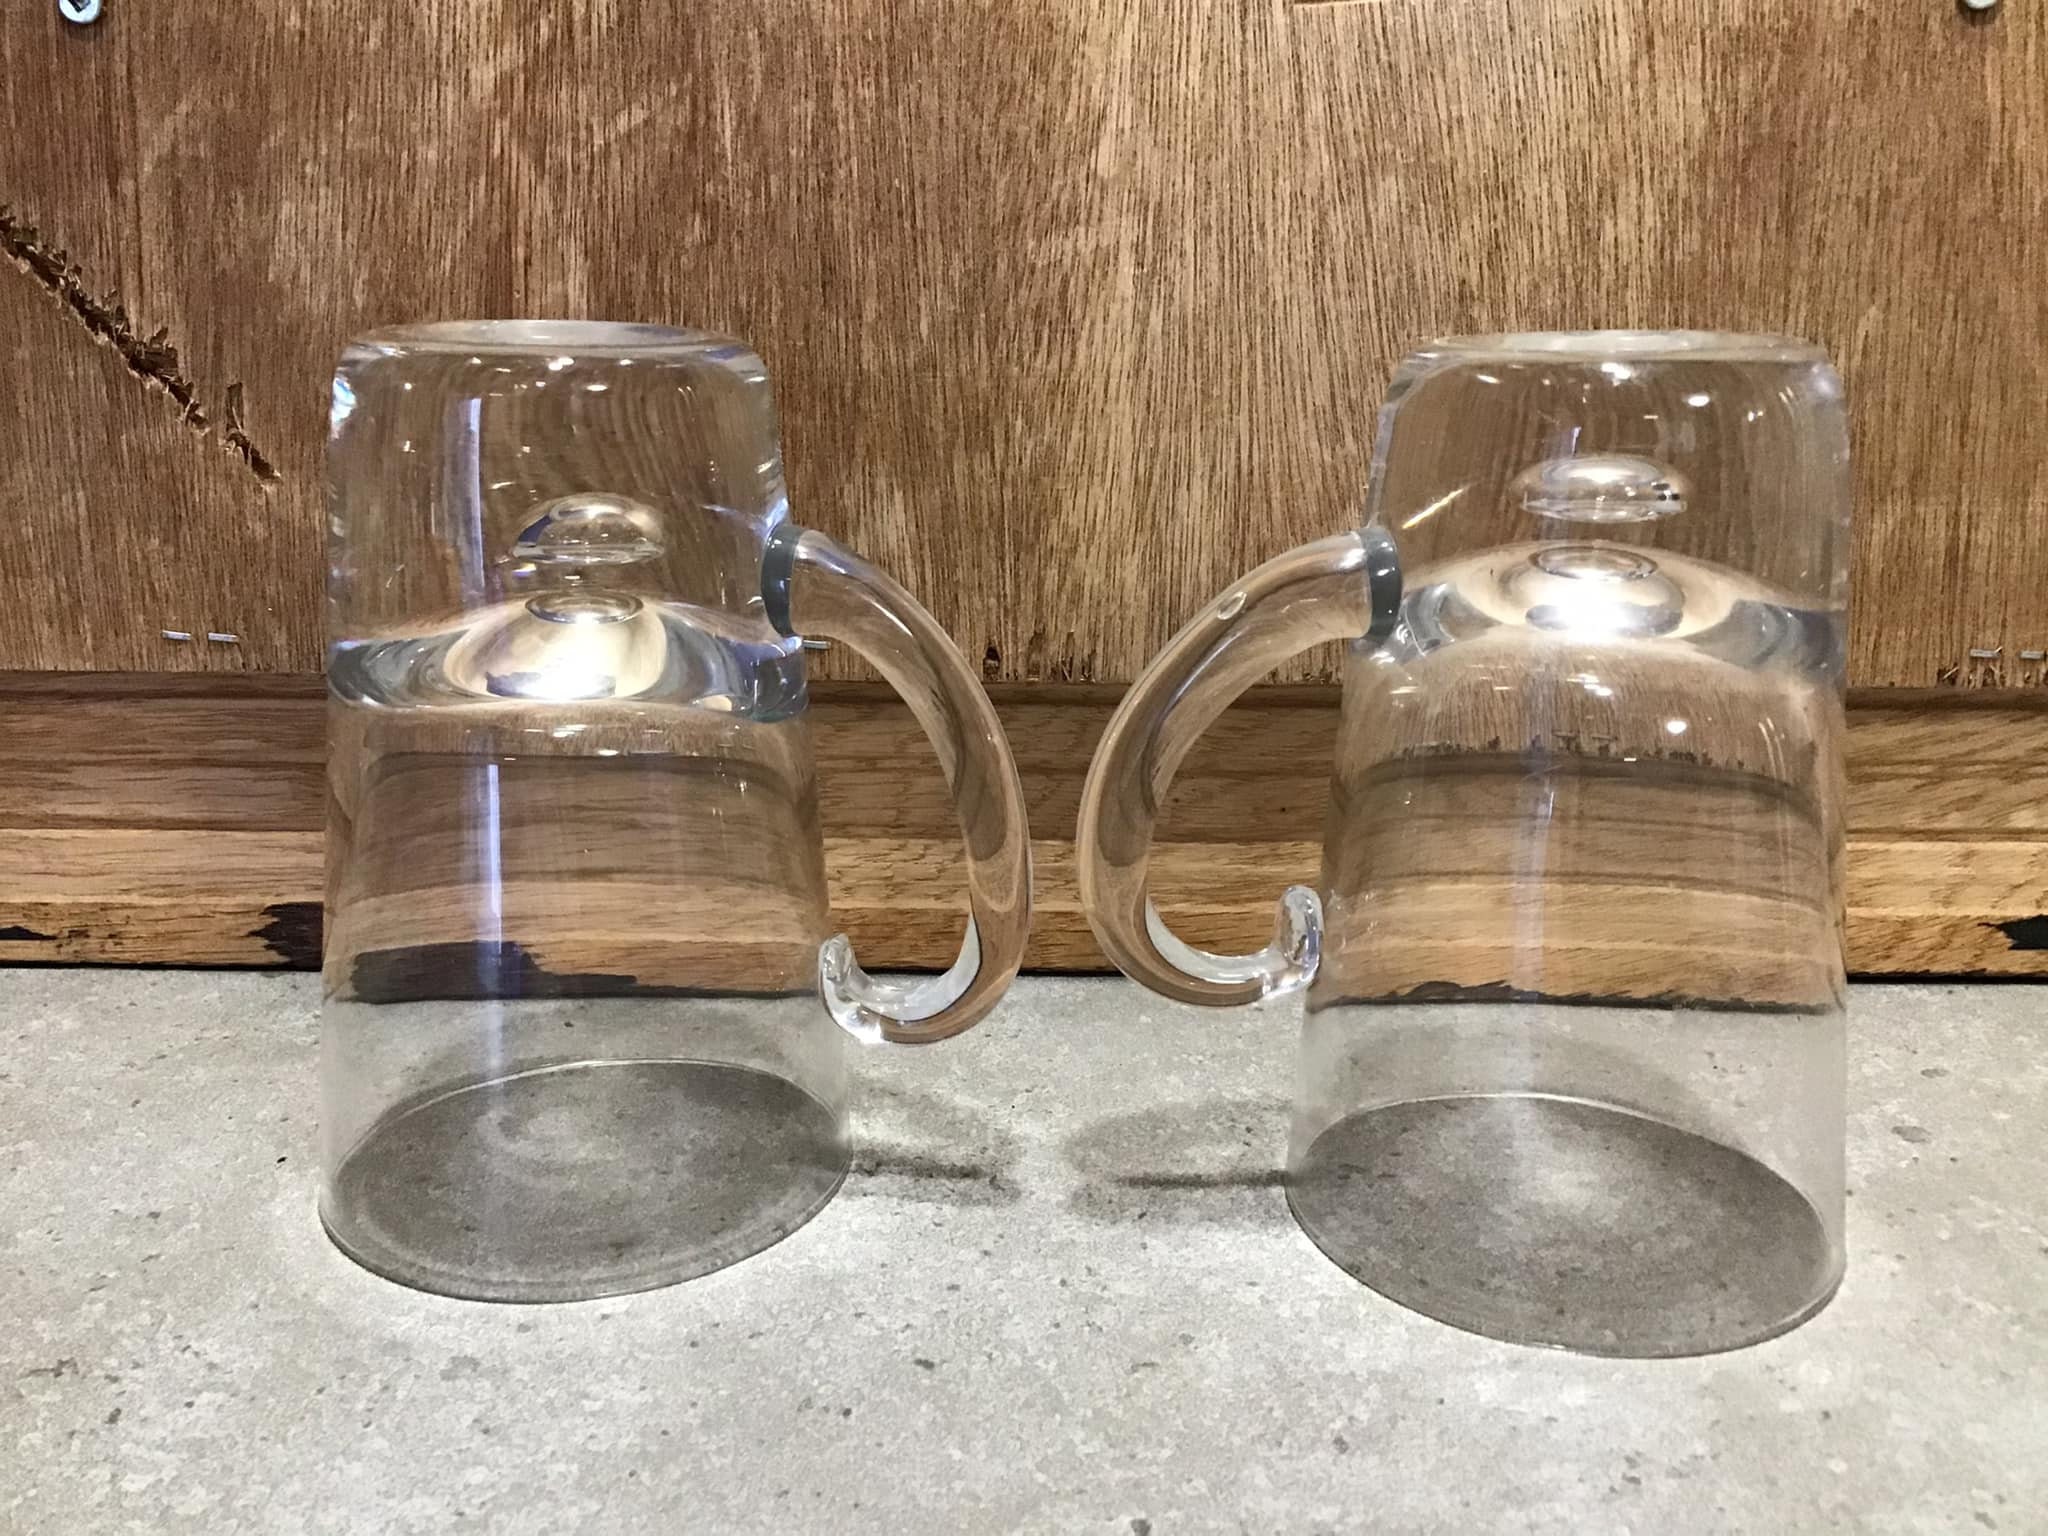 2 VINTAGE Drinking Glasses With Handle, Bubble Art Glass, Bubble Glass,  Collectible Glass, Wedding Gift, Hostess Gift 